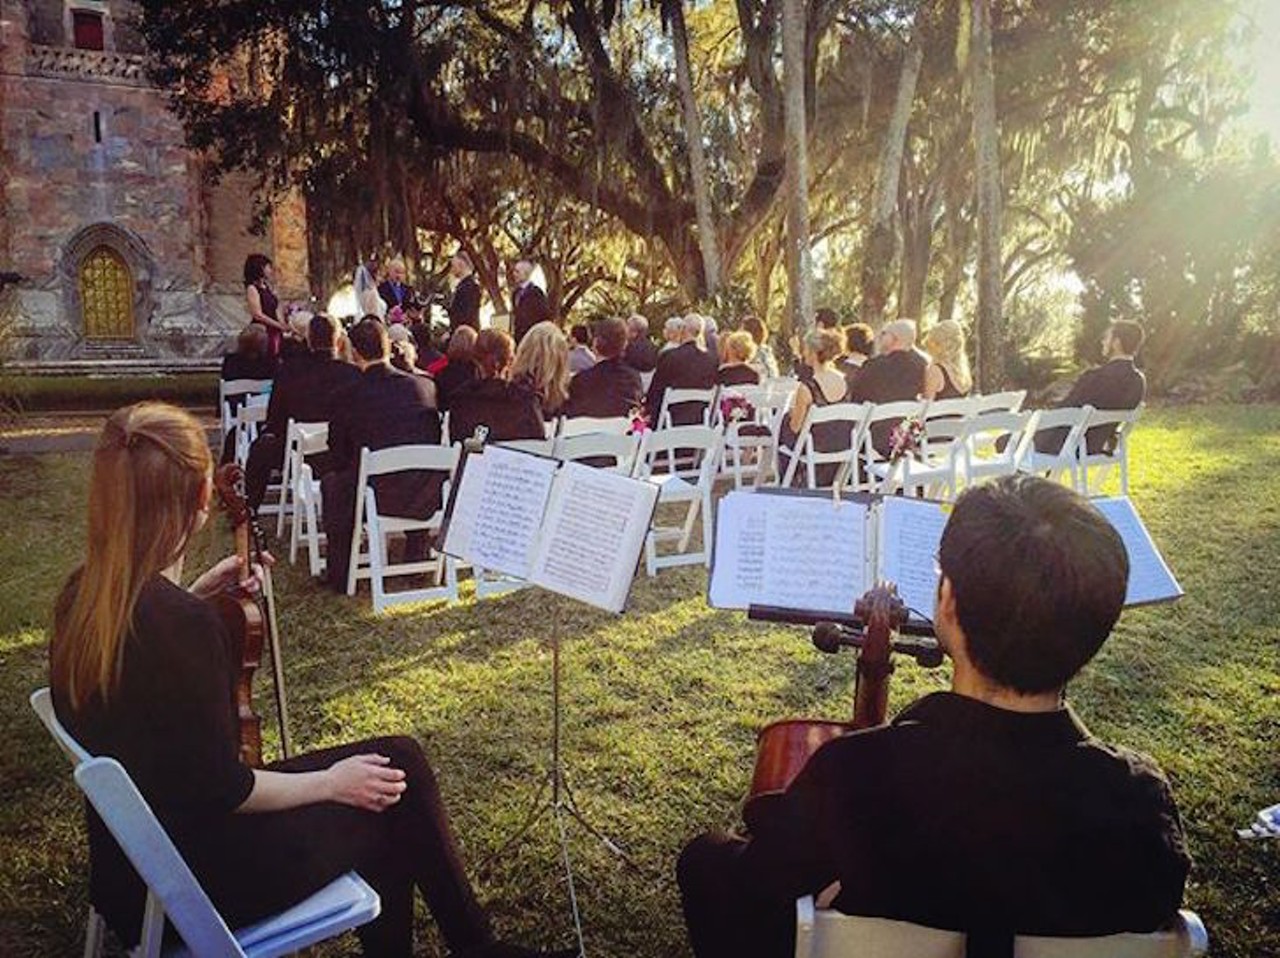 Bok Tower Gardens
This 205 foot neogothic tower is probably the most fairy tale-like location in Central Florida and a great place to get hitched.
1151 Tower Blvd., Lake Wales | 407-676-1408
Photo via jaclynduncanmusic/Instagram